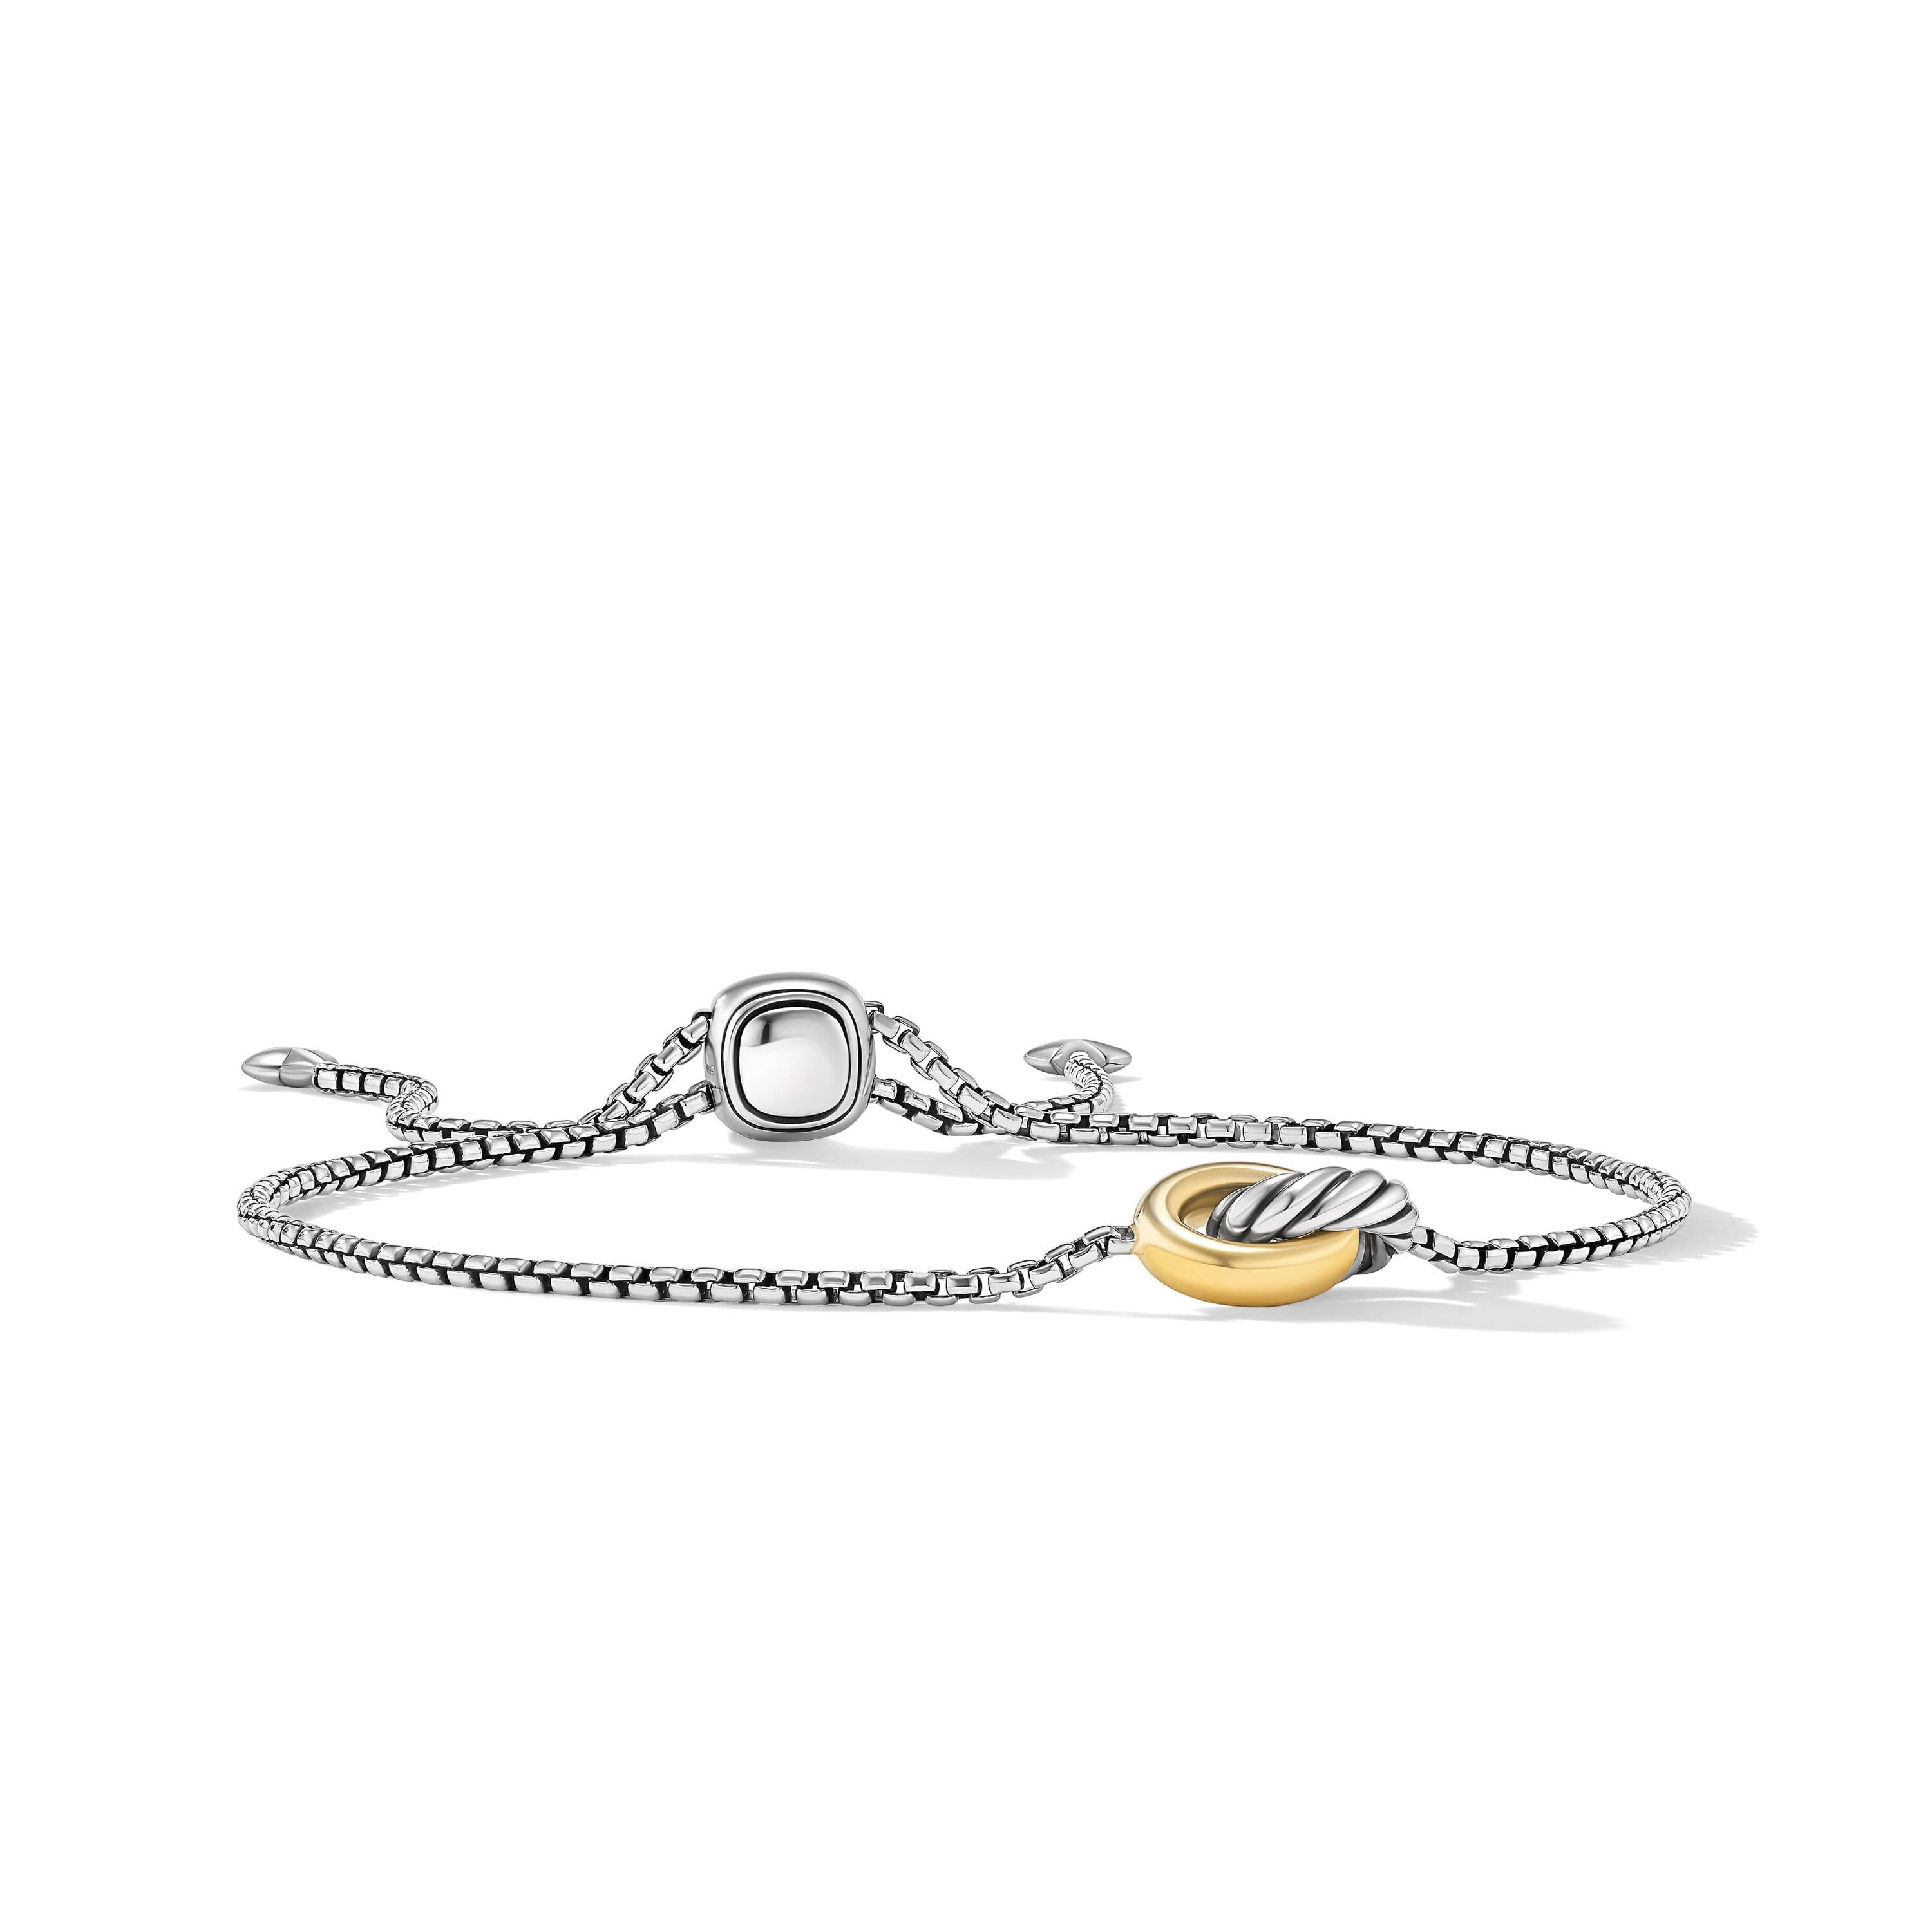 David Yurman Petite Cable Linked Bracelet in Sterling Silver with 14K Yellow Gold 0